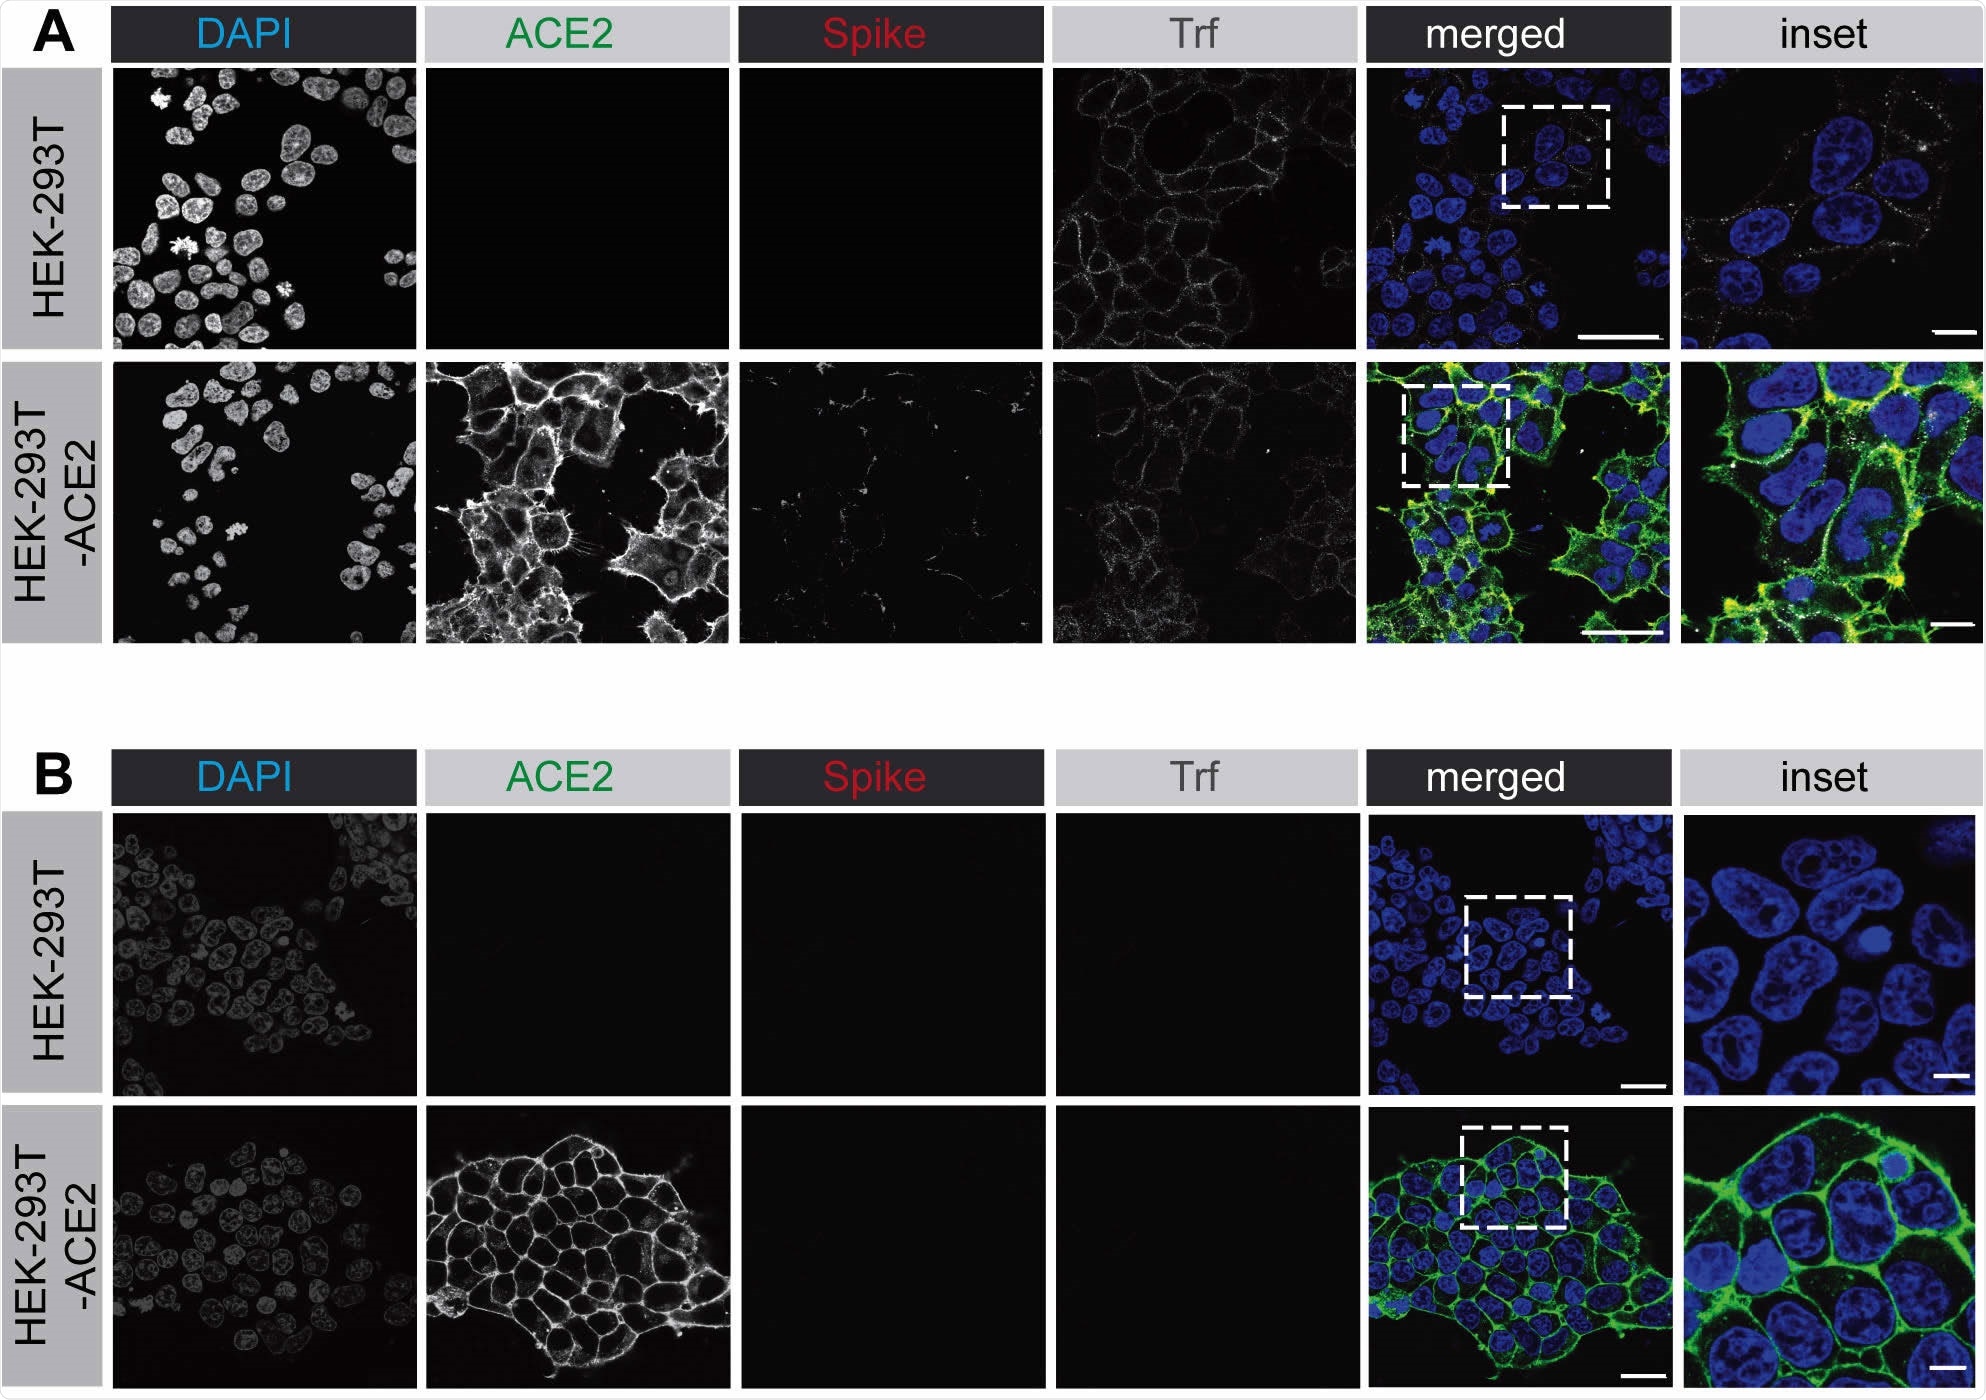 The SARS-CoV-2 spike protein binds to the surface of HEK-293 cells expressing ACE2.  (A) HEK-293 cells, wild-type (top row of image) or stable expression of ACE2 (bottom row of image), purified His6-tagged spike protein and alexa-647 labeled transferrin at 4°. After incubating for 30 minutes in C. After washing with PBS, cells were fixed and stained with DAPI to reveal nuclei, the antibody selectively recognized ACE2, and the antibody recognized the spike protein His6 epitope tag.  The scale bar is 40 µm for low magnification images and 10 µm for high magnification insets.  (B) An experiment carried out in the same manner as in A, except that HEK-293 cells were briefly washed with acid before fixation.  The scale bar is 40 µm for low magnification images and 10 µm for high magnification insets.